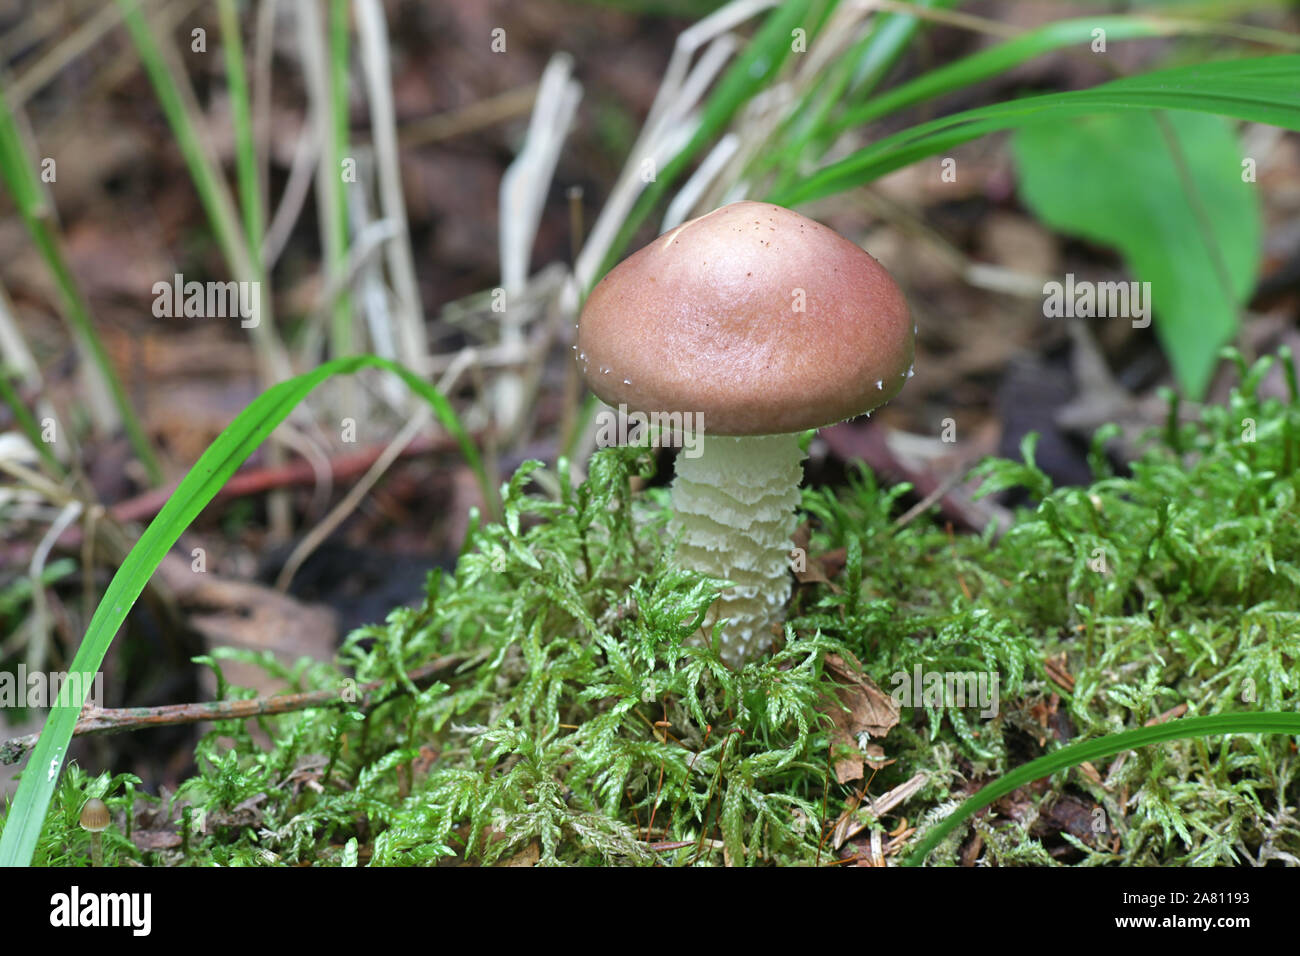 Stropharia hornemannii, known as conifer roundhead, luxuriant ringstalk or lacerated stropharia, wild mushroom from Finland Stock Photo